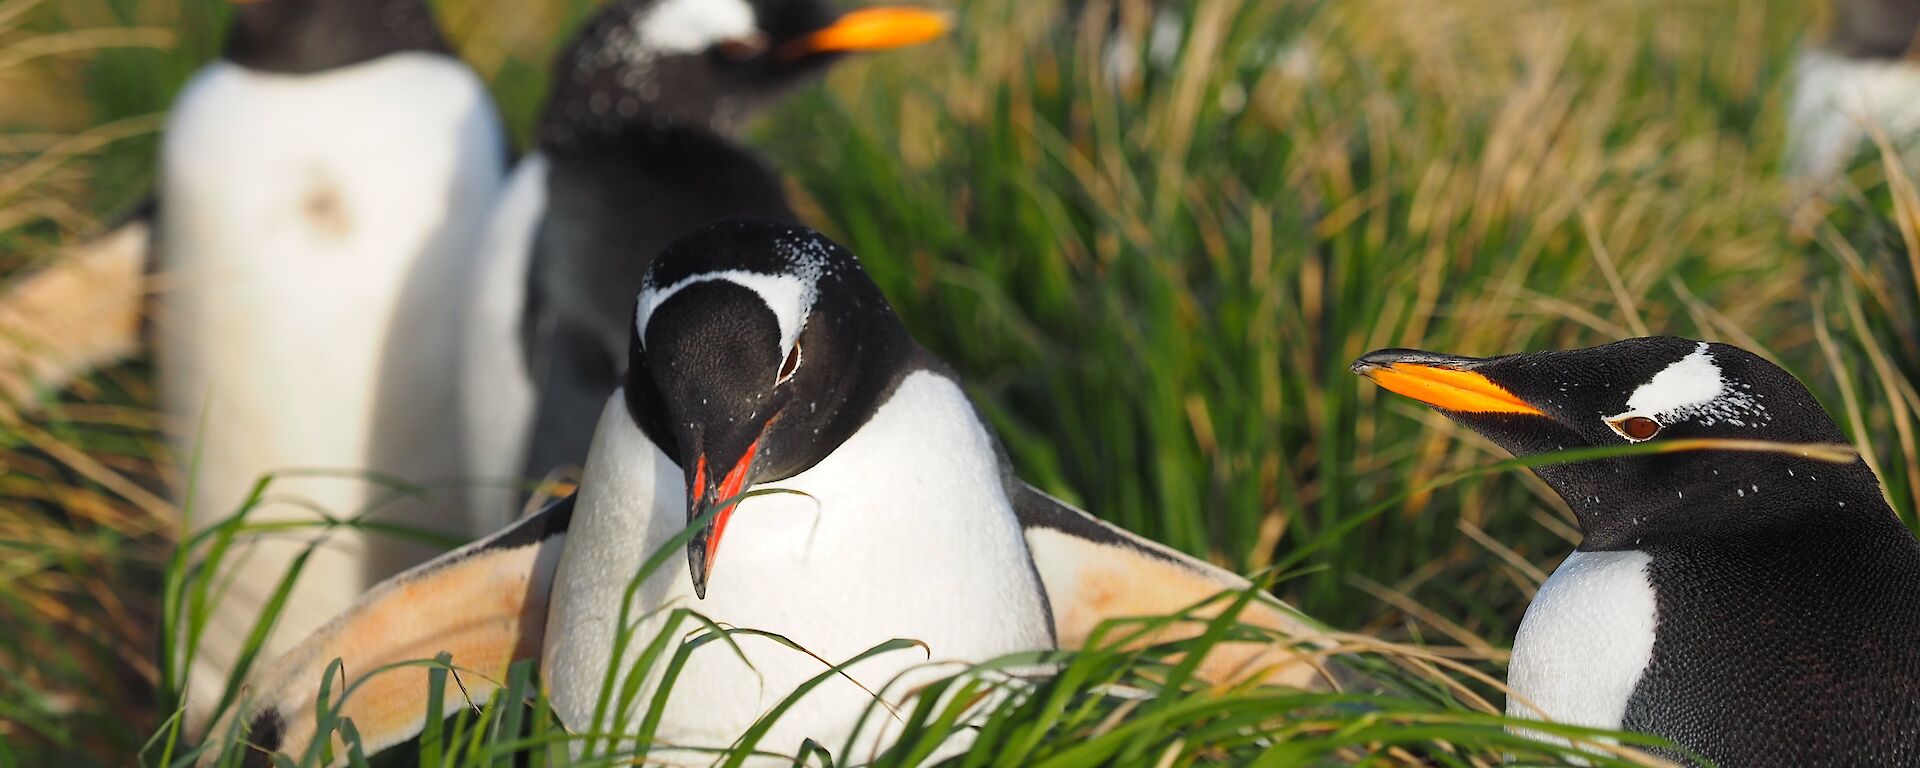 Gentoo penguins among the tussock grass